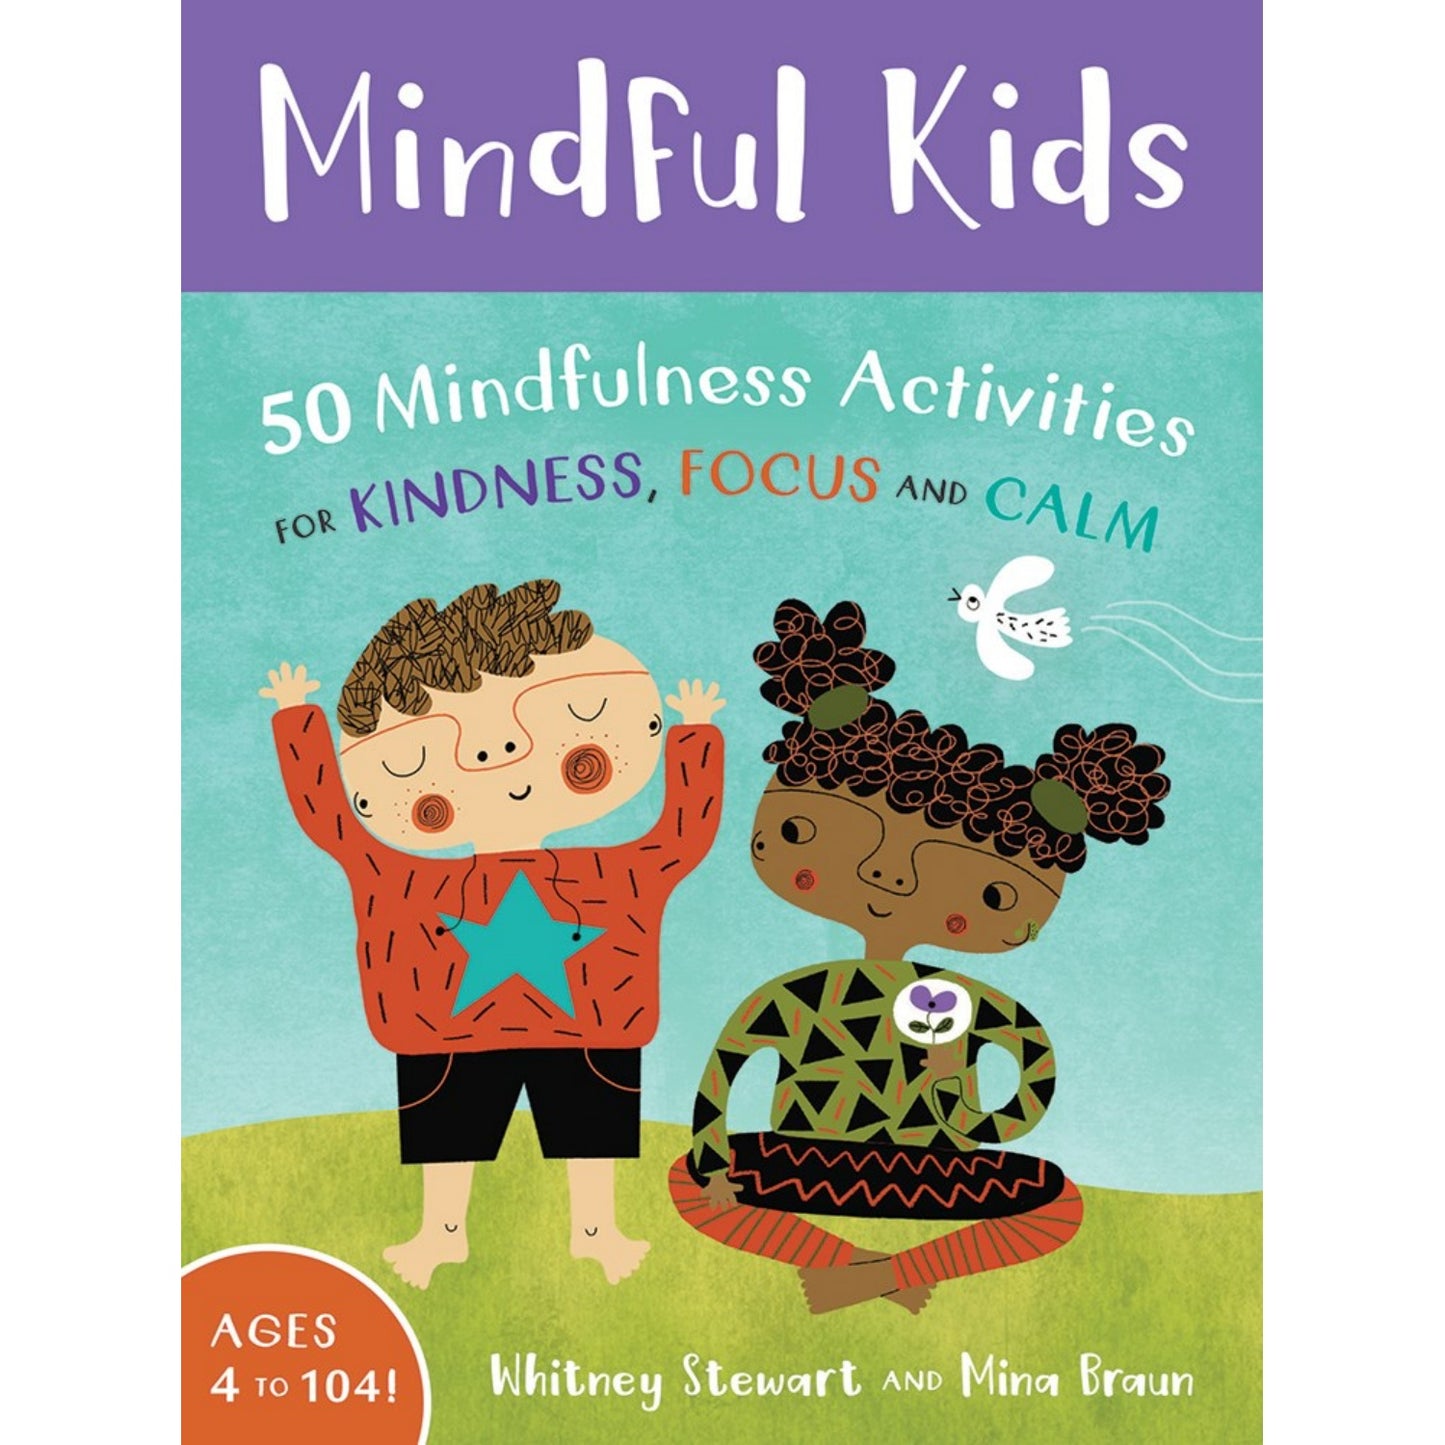 Mindful Kids Cards: 50 Mindfulness Activities for Kindness, Focus and Calm